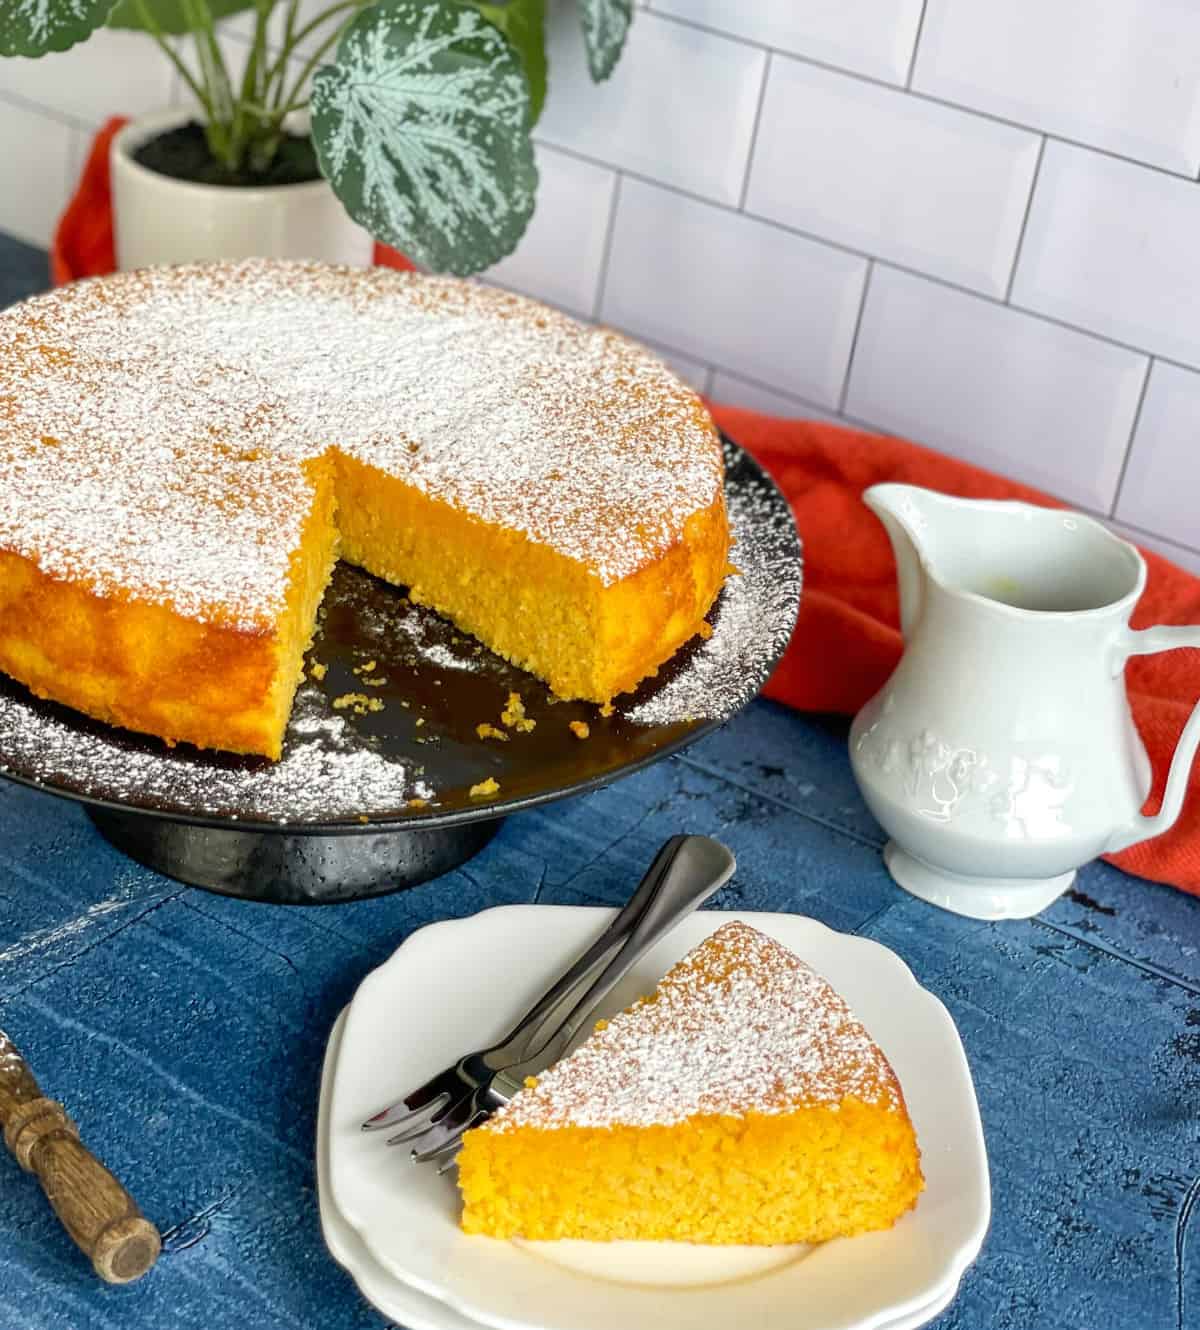 Orange and almond cake, with a slice taken out on a white plate and orange syrup in a small white jug